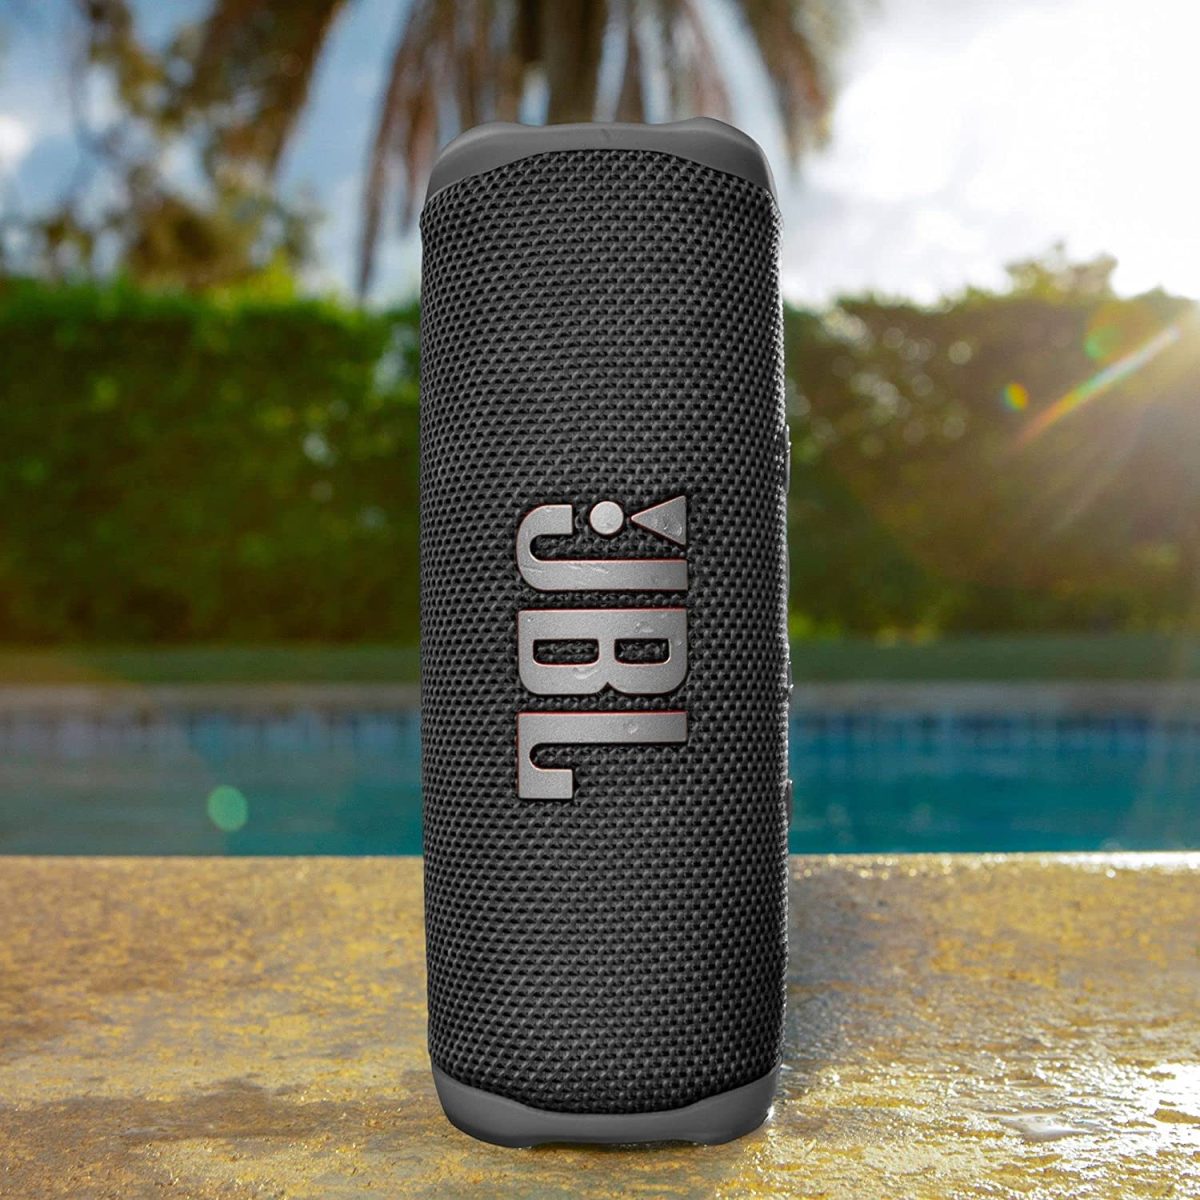 81Ayzuqdi L. Ac Sl1500 Jbl &Lt;H1&Gt;Jbl Flip 6 Portable Bluetooth Wireless Speaker - Black&Lt;/H1&Gt; Https://Www.youtube.com/Watch?V=F6Waogaxhme Bold Sound For Every Adventure. Your Adventure. Your Soundtrack. The Bold New Jbl Flip 6 Delivers Powerful Jbl Original Pro Sound With Exceptional Clarity Thanks To Its 2-Way Speaker System Consisting Of An Optimized Racetrack-Shaped Driver, Separate Tweeter, And Dual Pumping Bass Radiators. This Big-Sounding, Yet Easy To Carry Speaker Is Waterproof And Dustproof, So You Can Take It Anywhere In Any Weather. And With 12 Hours Of Battery Life, You Can Party ‘Til The Sun Goes Down—Or Comes Up—Wherever The Music Moves You. Use Partyboost To Link Multiple Compatible Speakers. The Flip 6 Comes In A Variety Of Cool Colors. Jbl Flip5 Grey Jbl Flip 6 Portable Bluetooth Wireless Speaker - Black